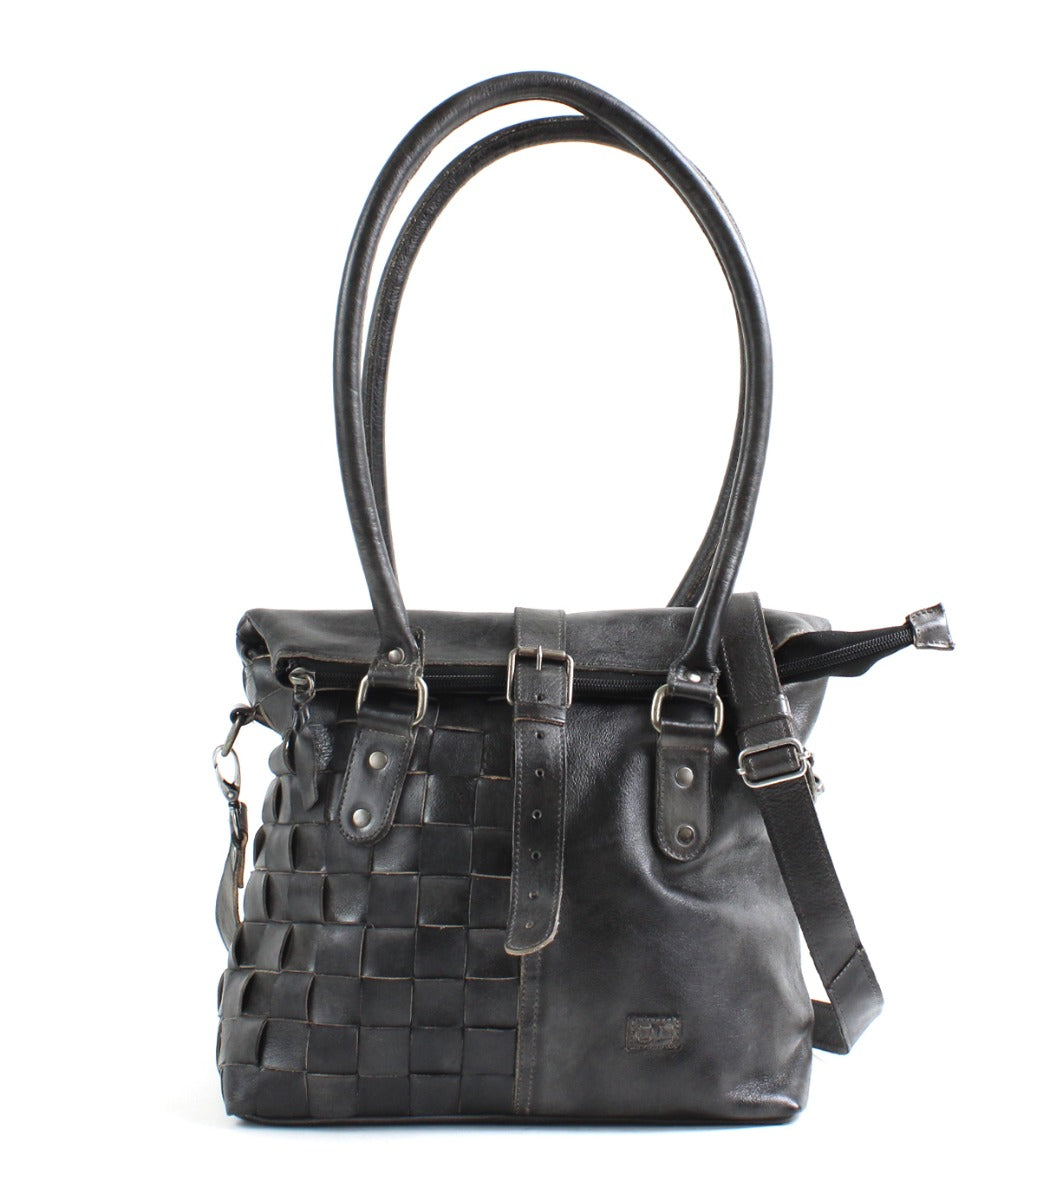 A black leather Rachel handbag with straps and buckles by Bed Stu.